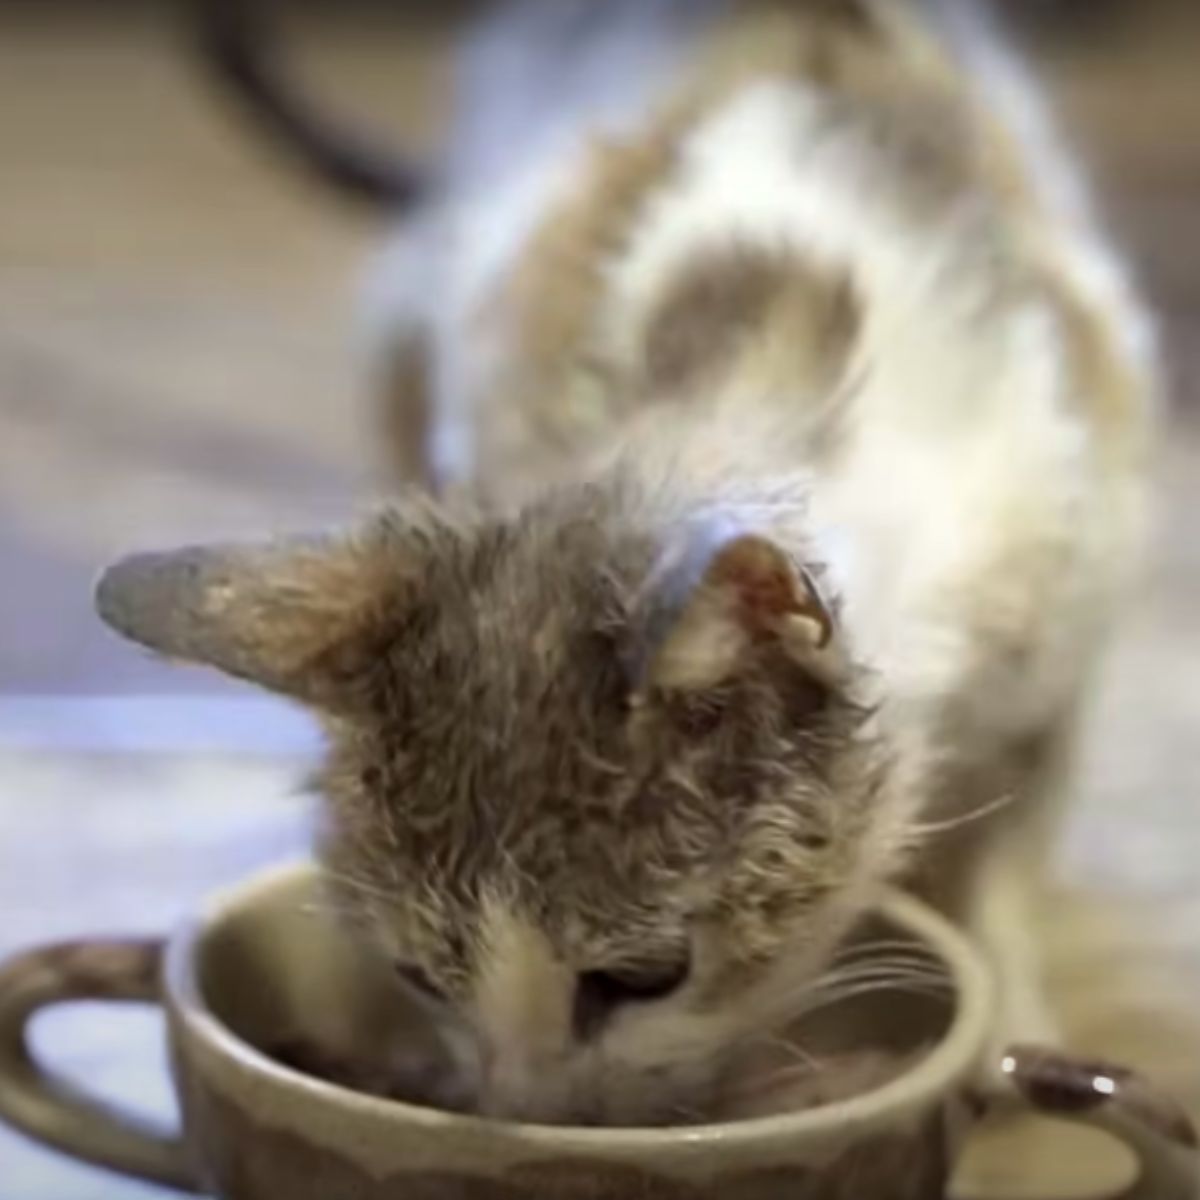 kitty drinks from a cup